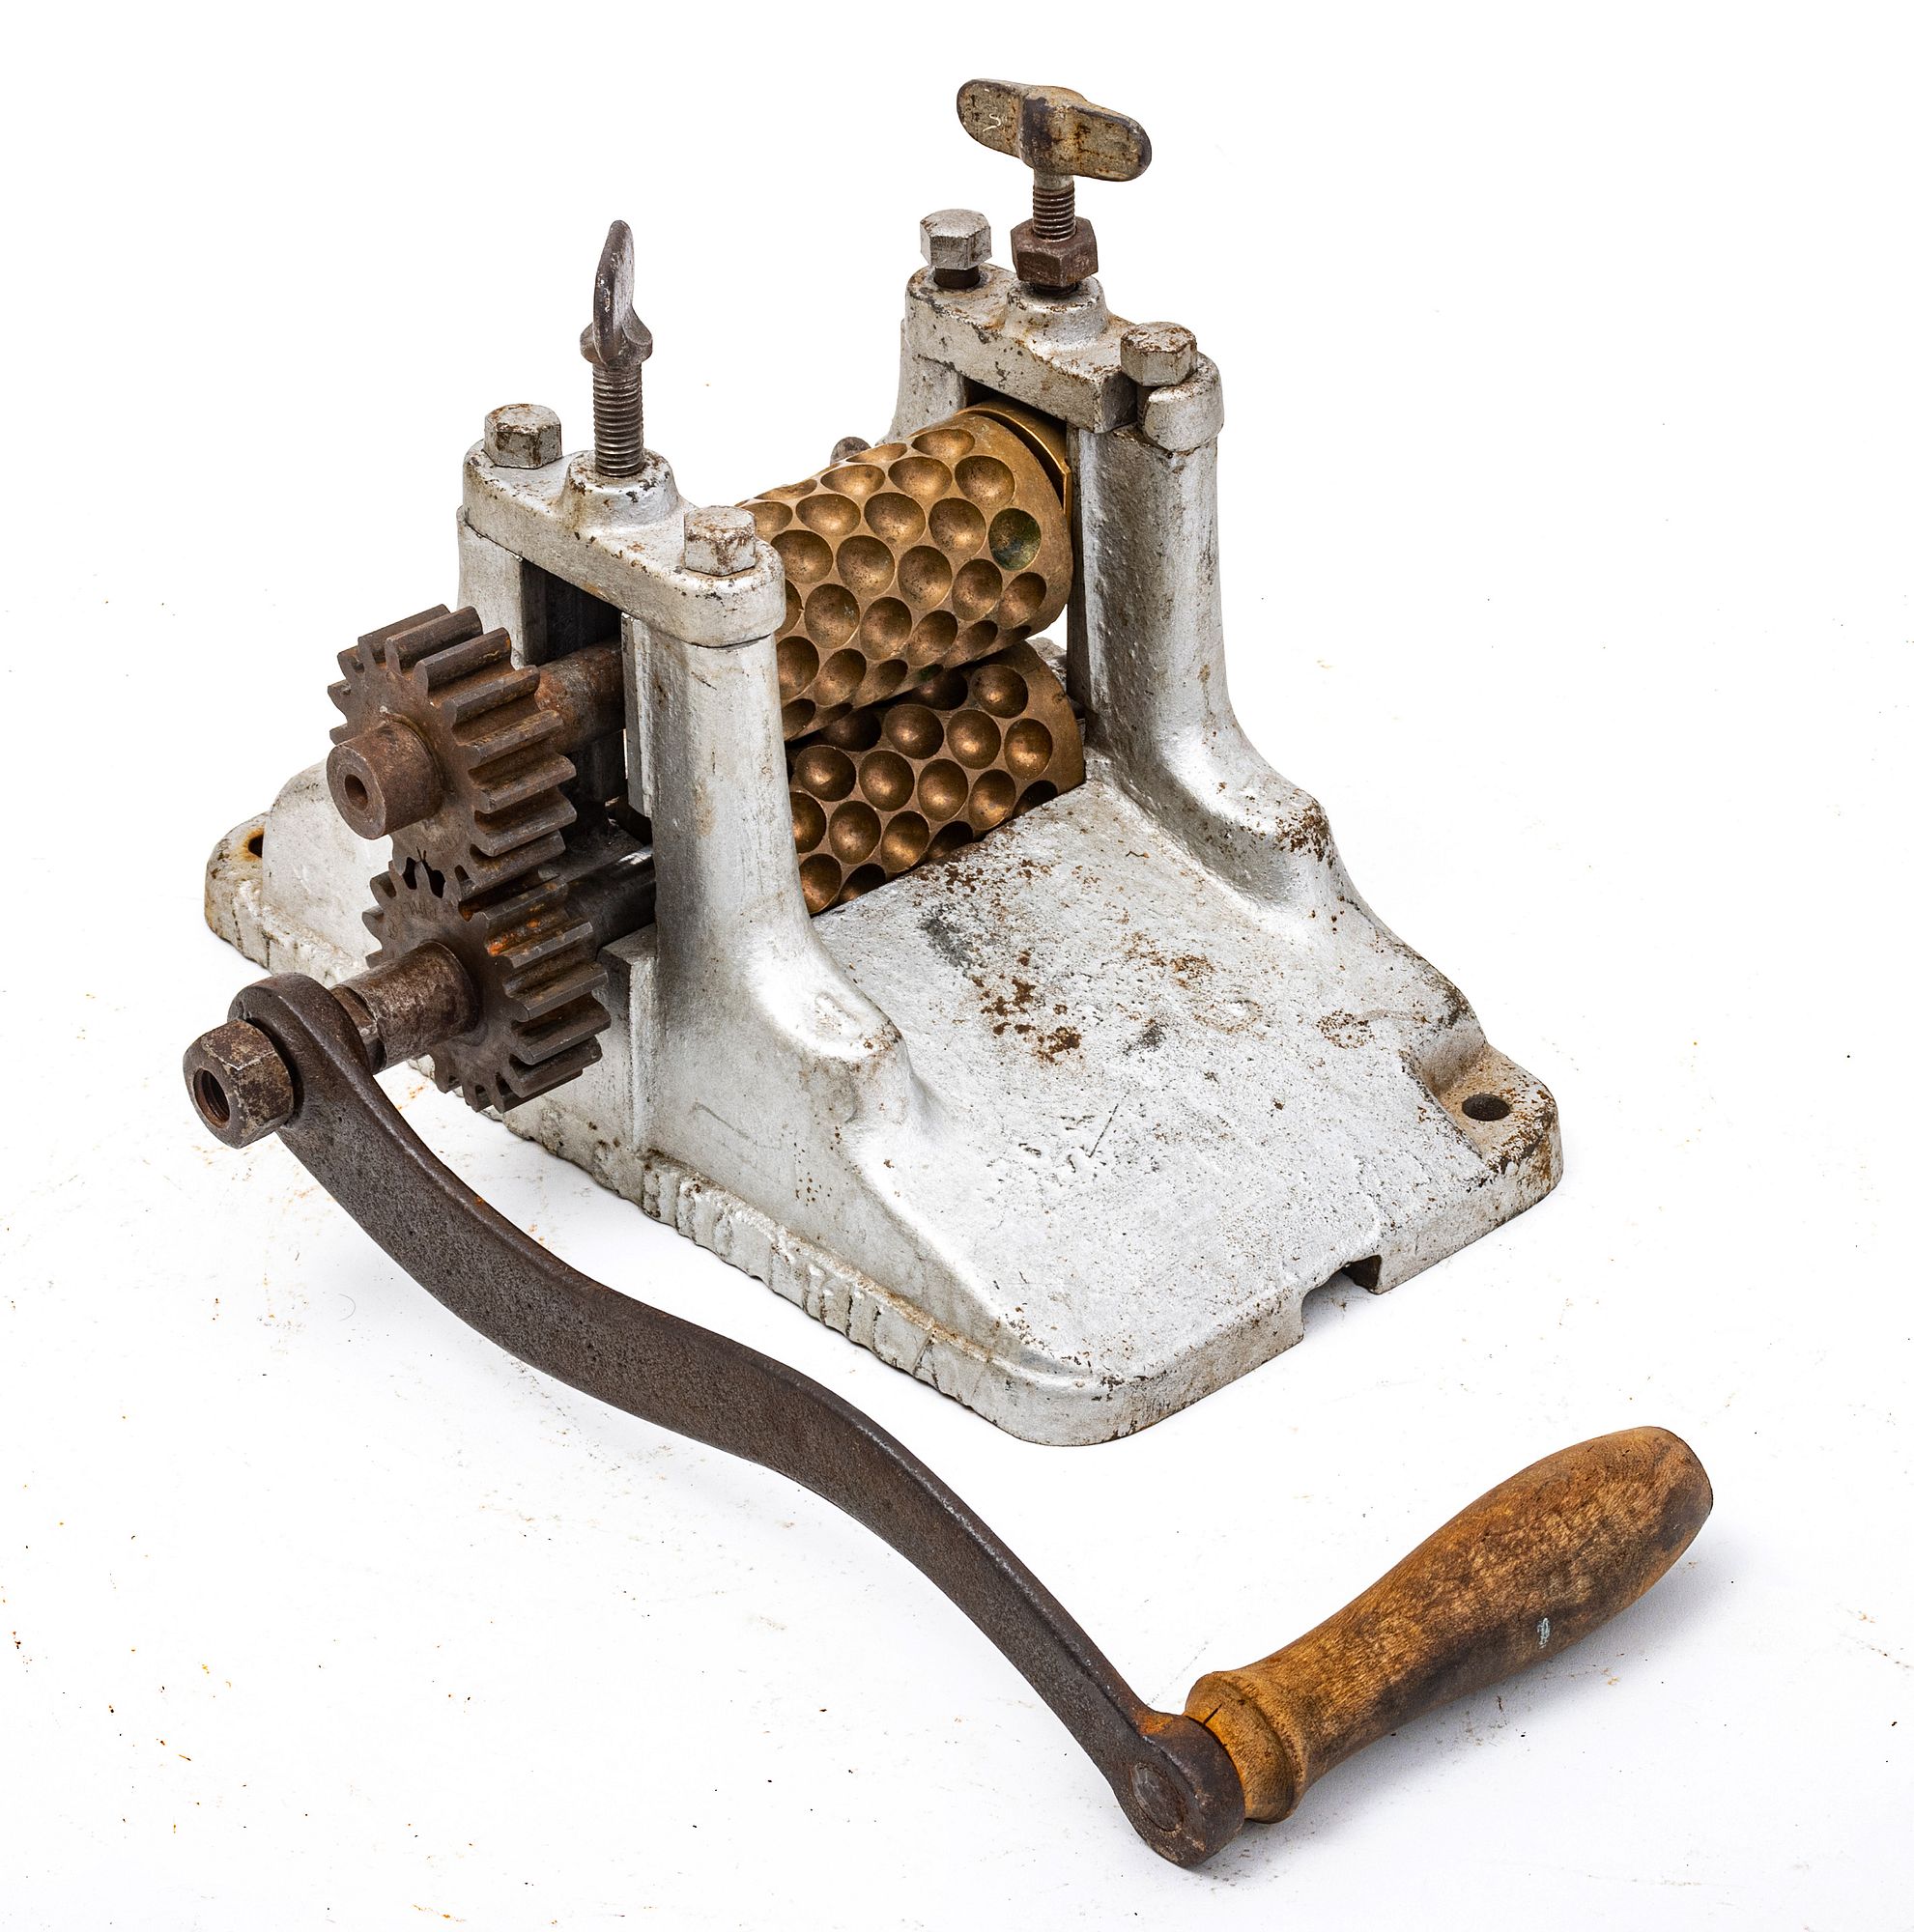 ANTIQUE CAST IRON & BRASS DROP CANDY PRESS, 19TH C, H 6.5, W 10, D 11.5  sold at auction on 24th February